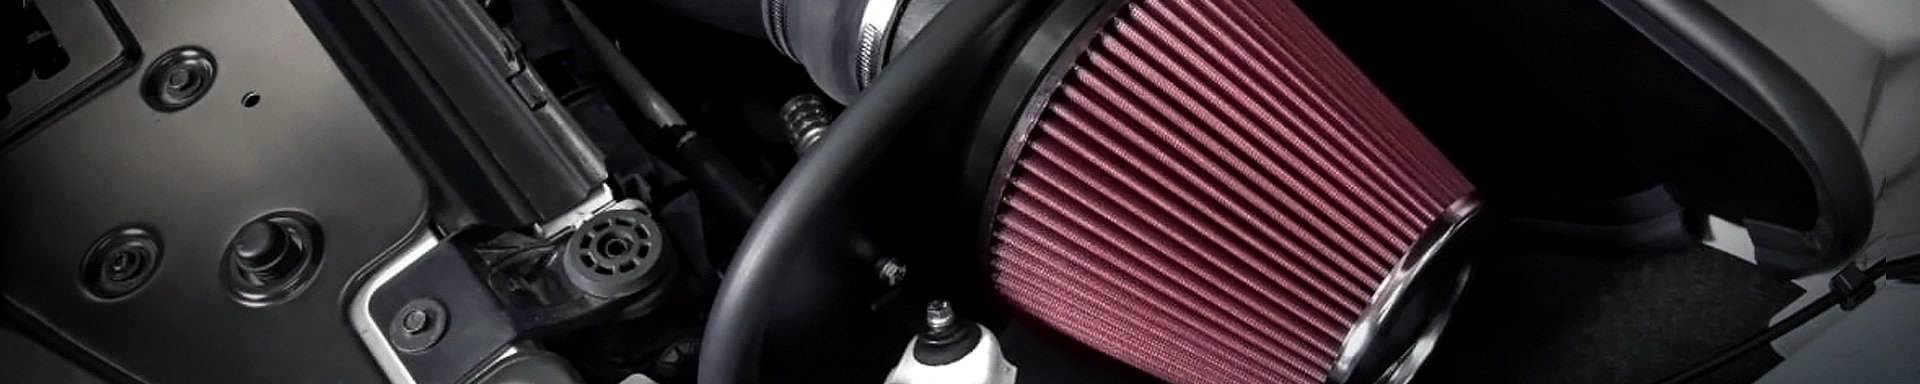 New K&N 57 Series Cold Air Intake System for Your Land Cruiser